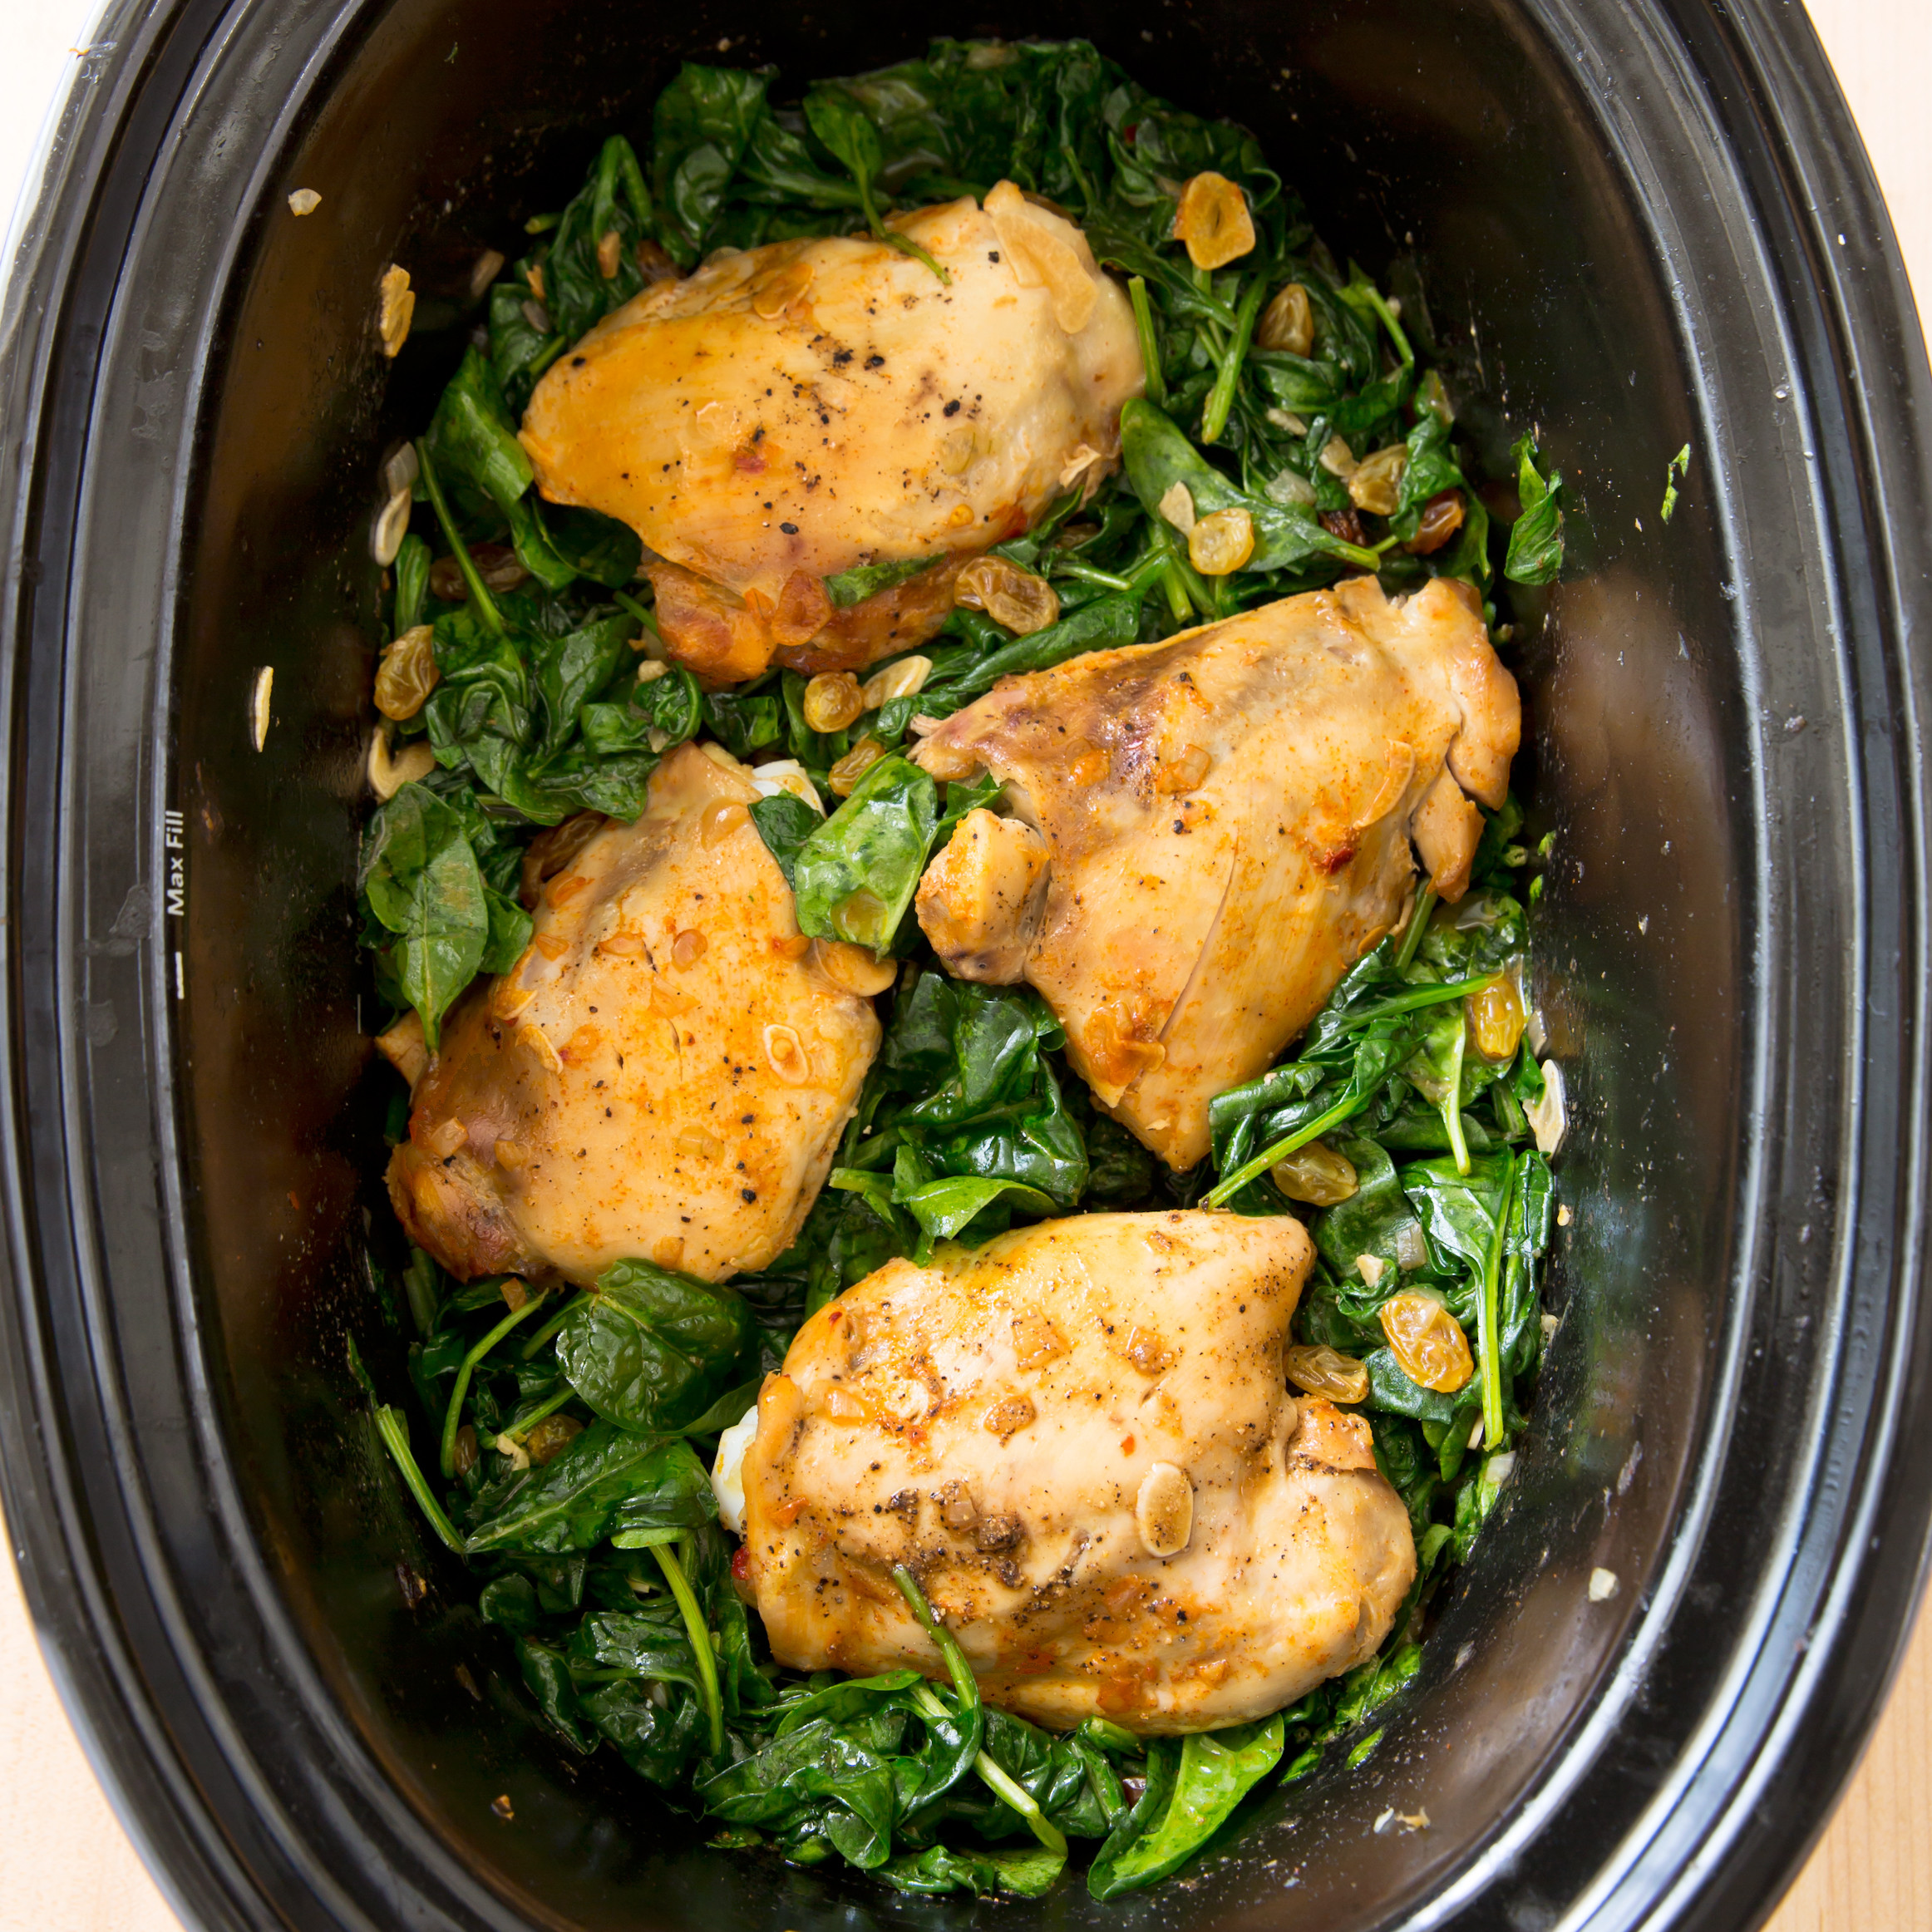 Healthy Slow Cooker Chicken Thighs
 Slow Cooker Braised Chicken Thighs with Garlicky Spinach